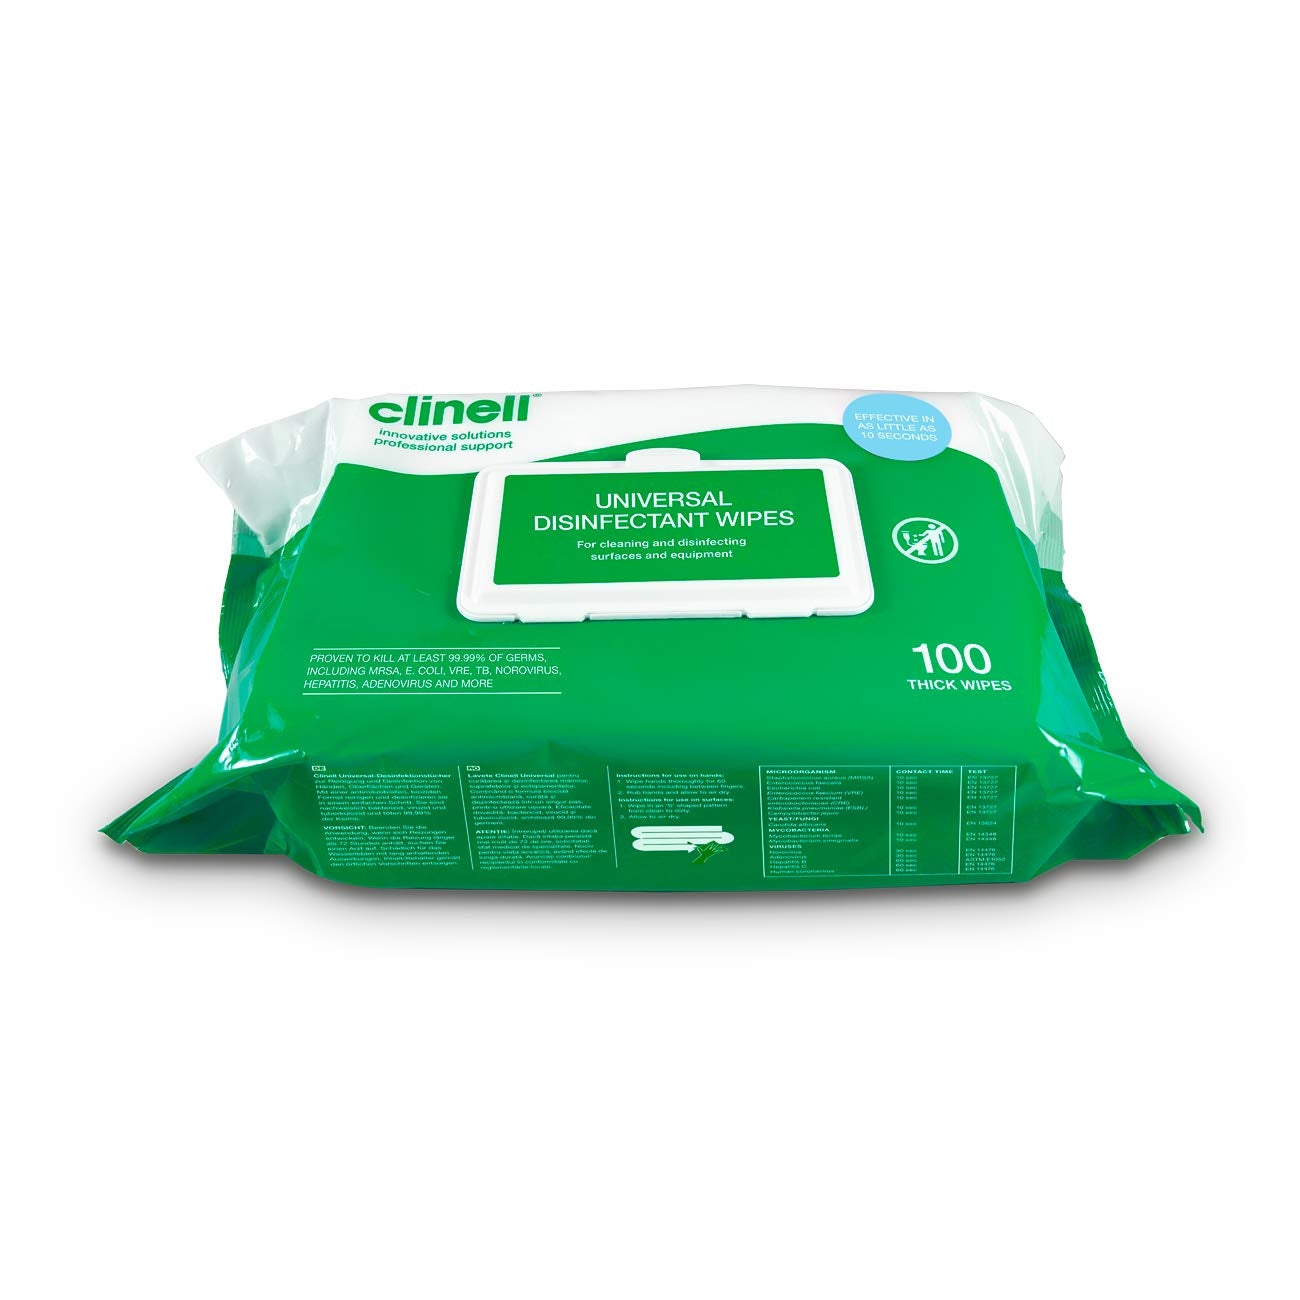 Clinell Universal Wipes - Pack Of 100